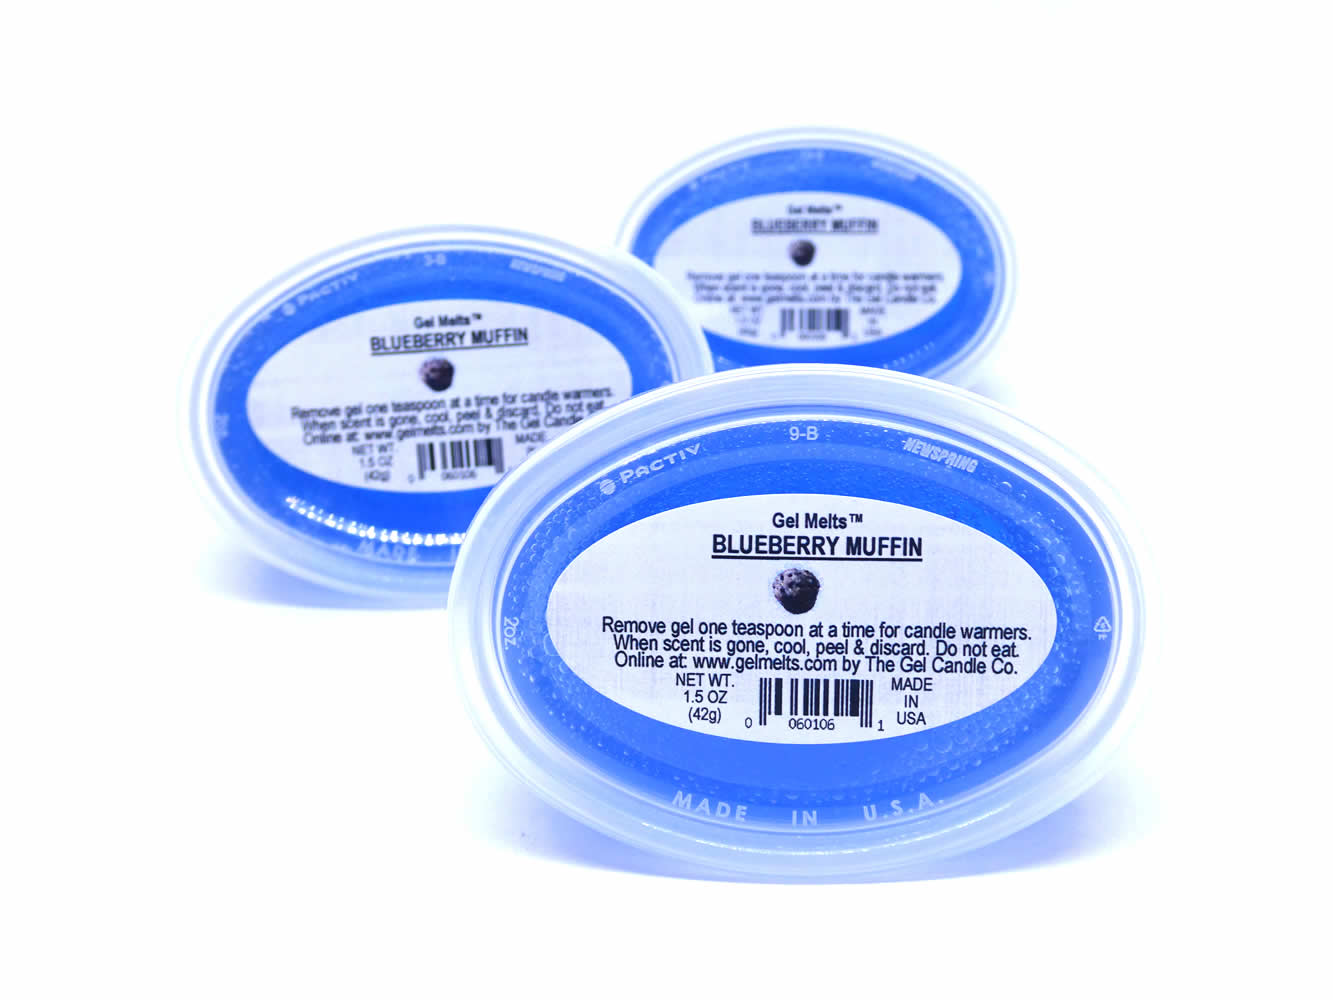 Blueberry Muffin scented Gel Melts™ Gel Wax for warmers - 3 pack